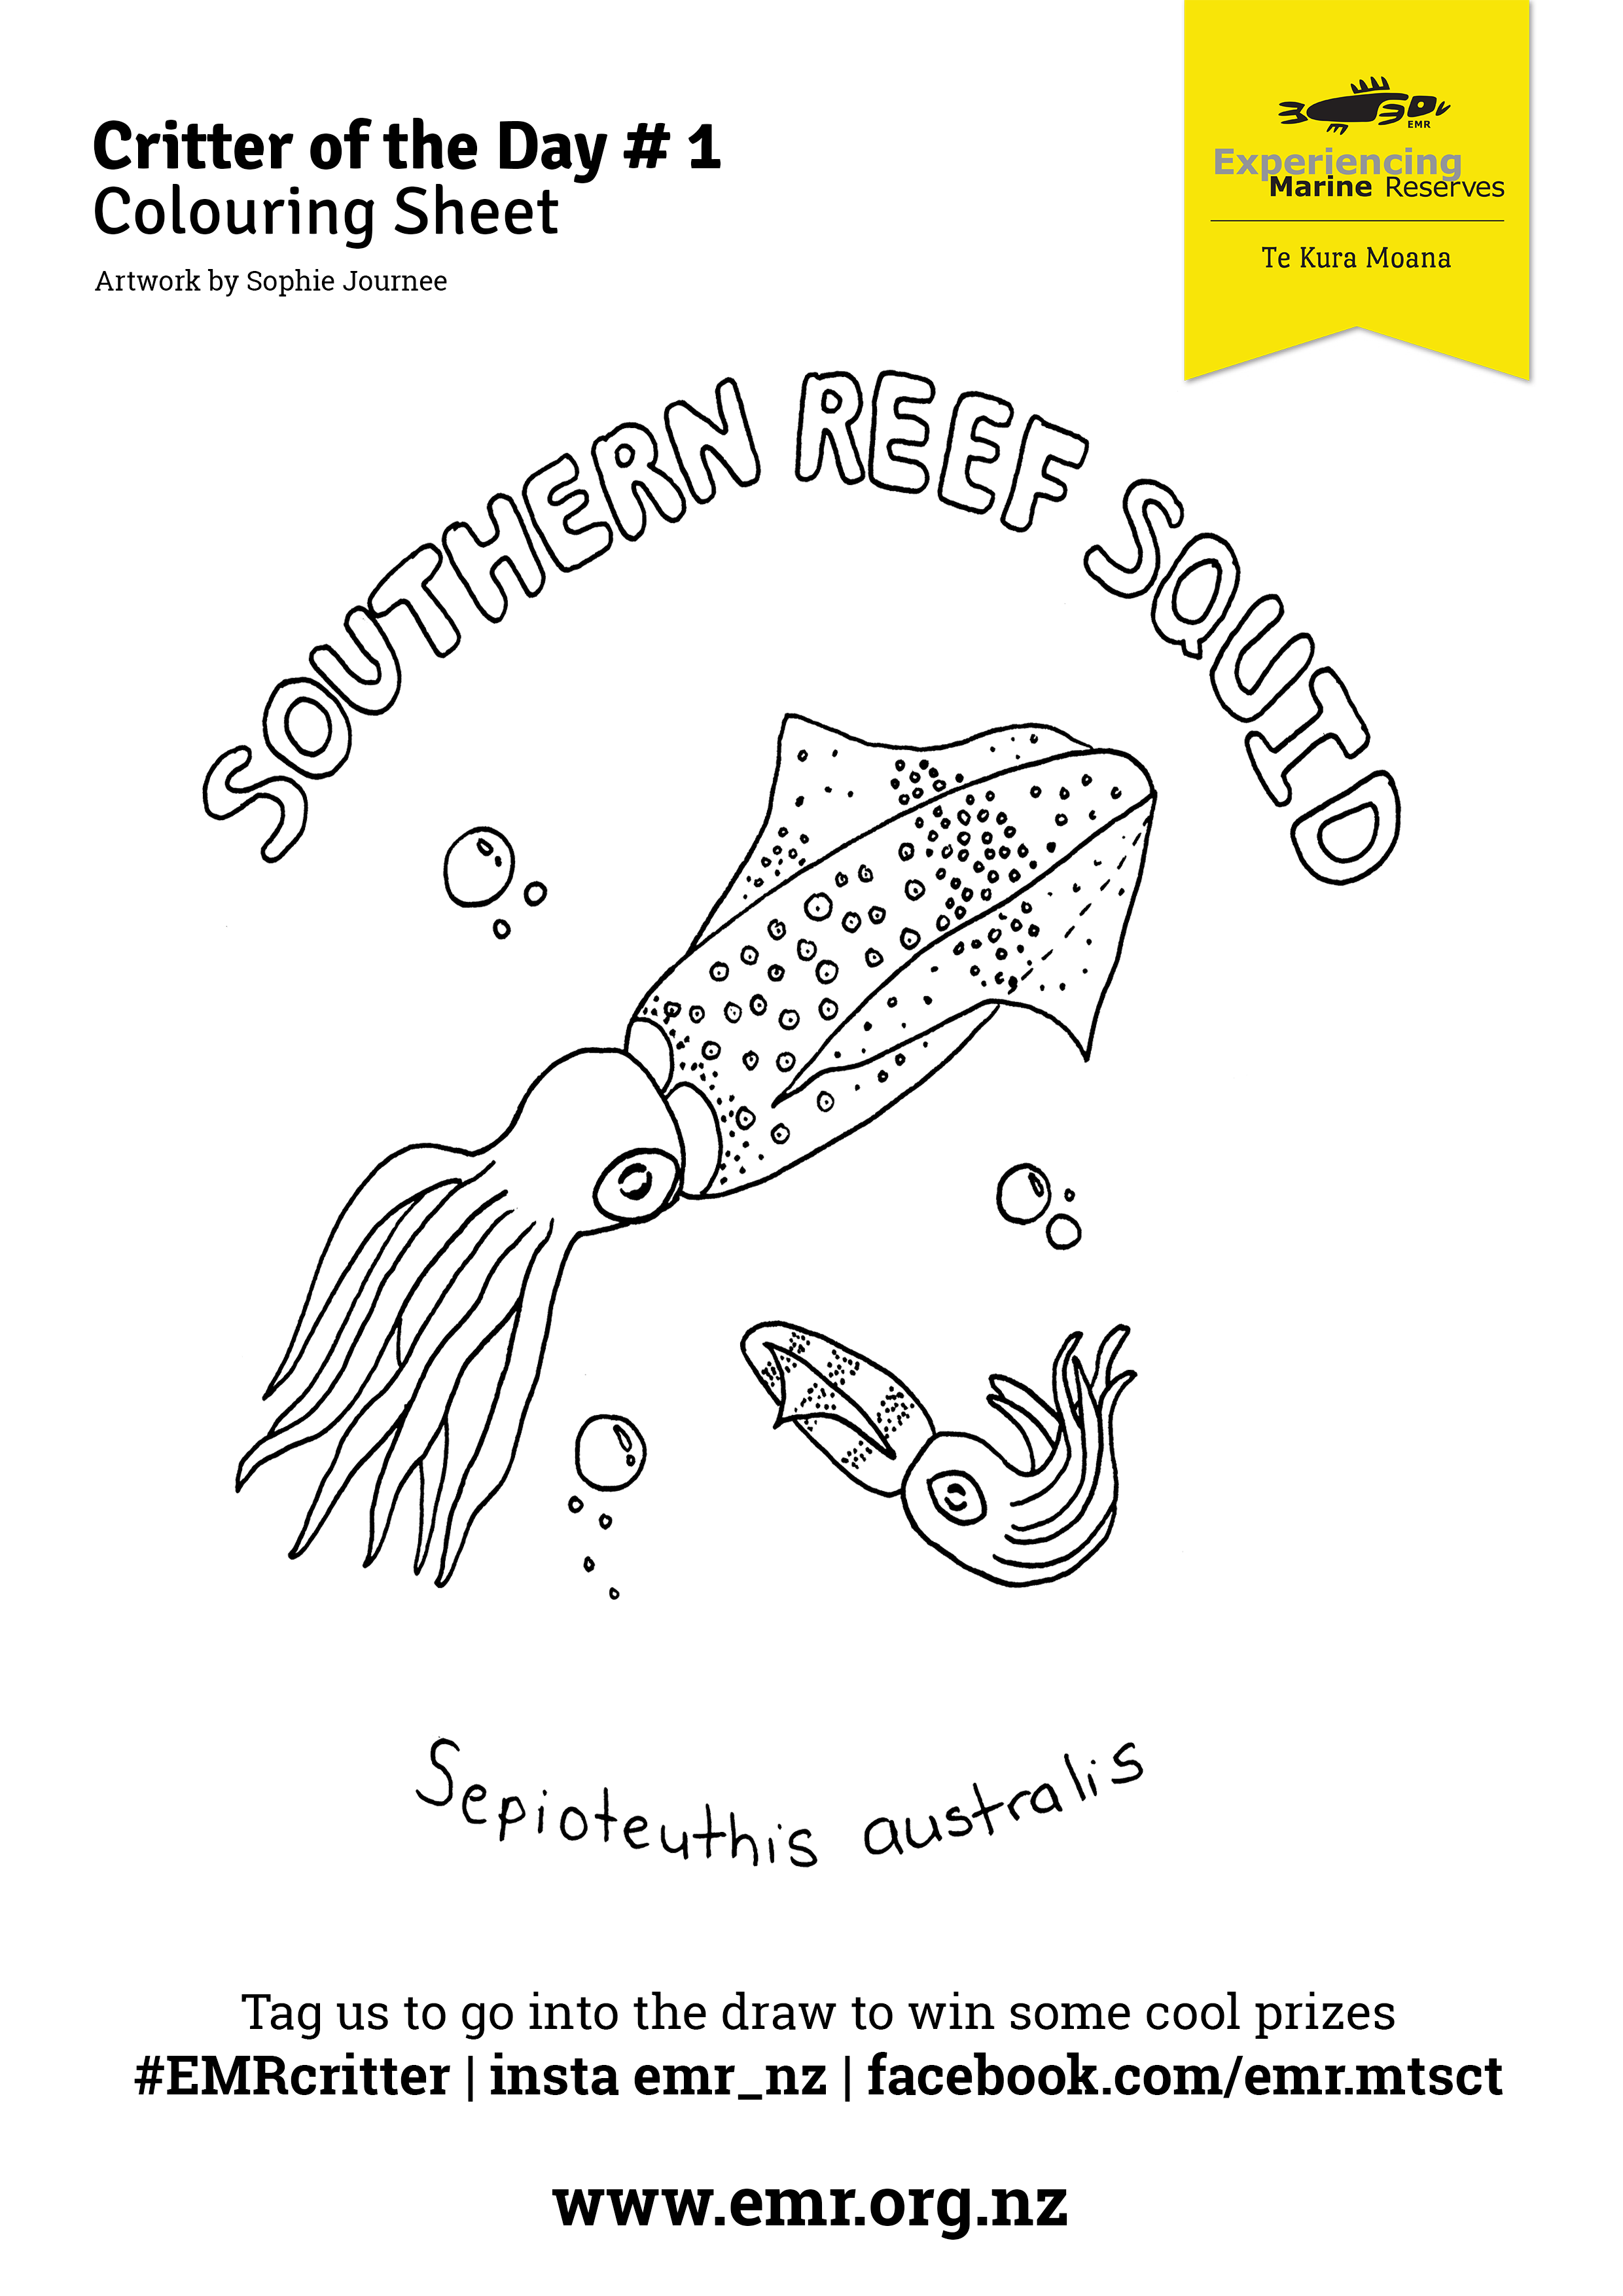 Critter of the Day Southern Reef Squid Colouring in